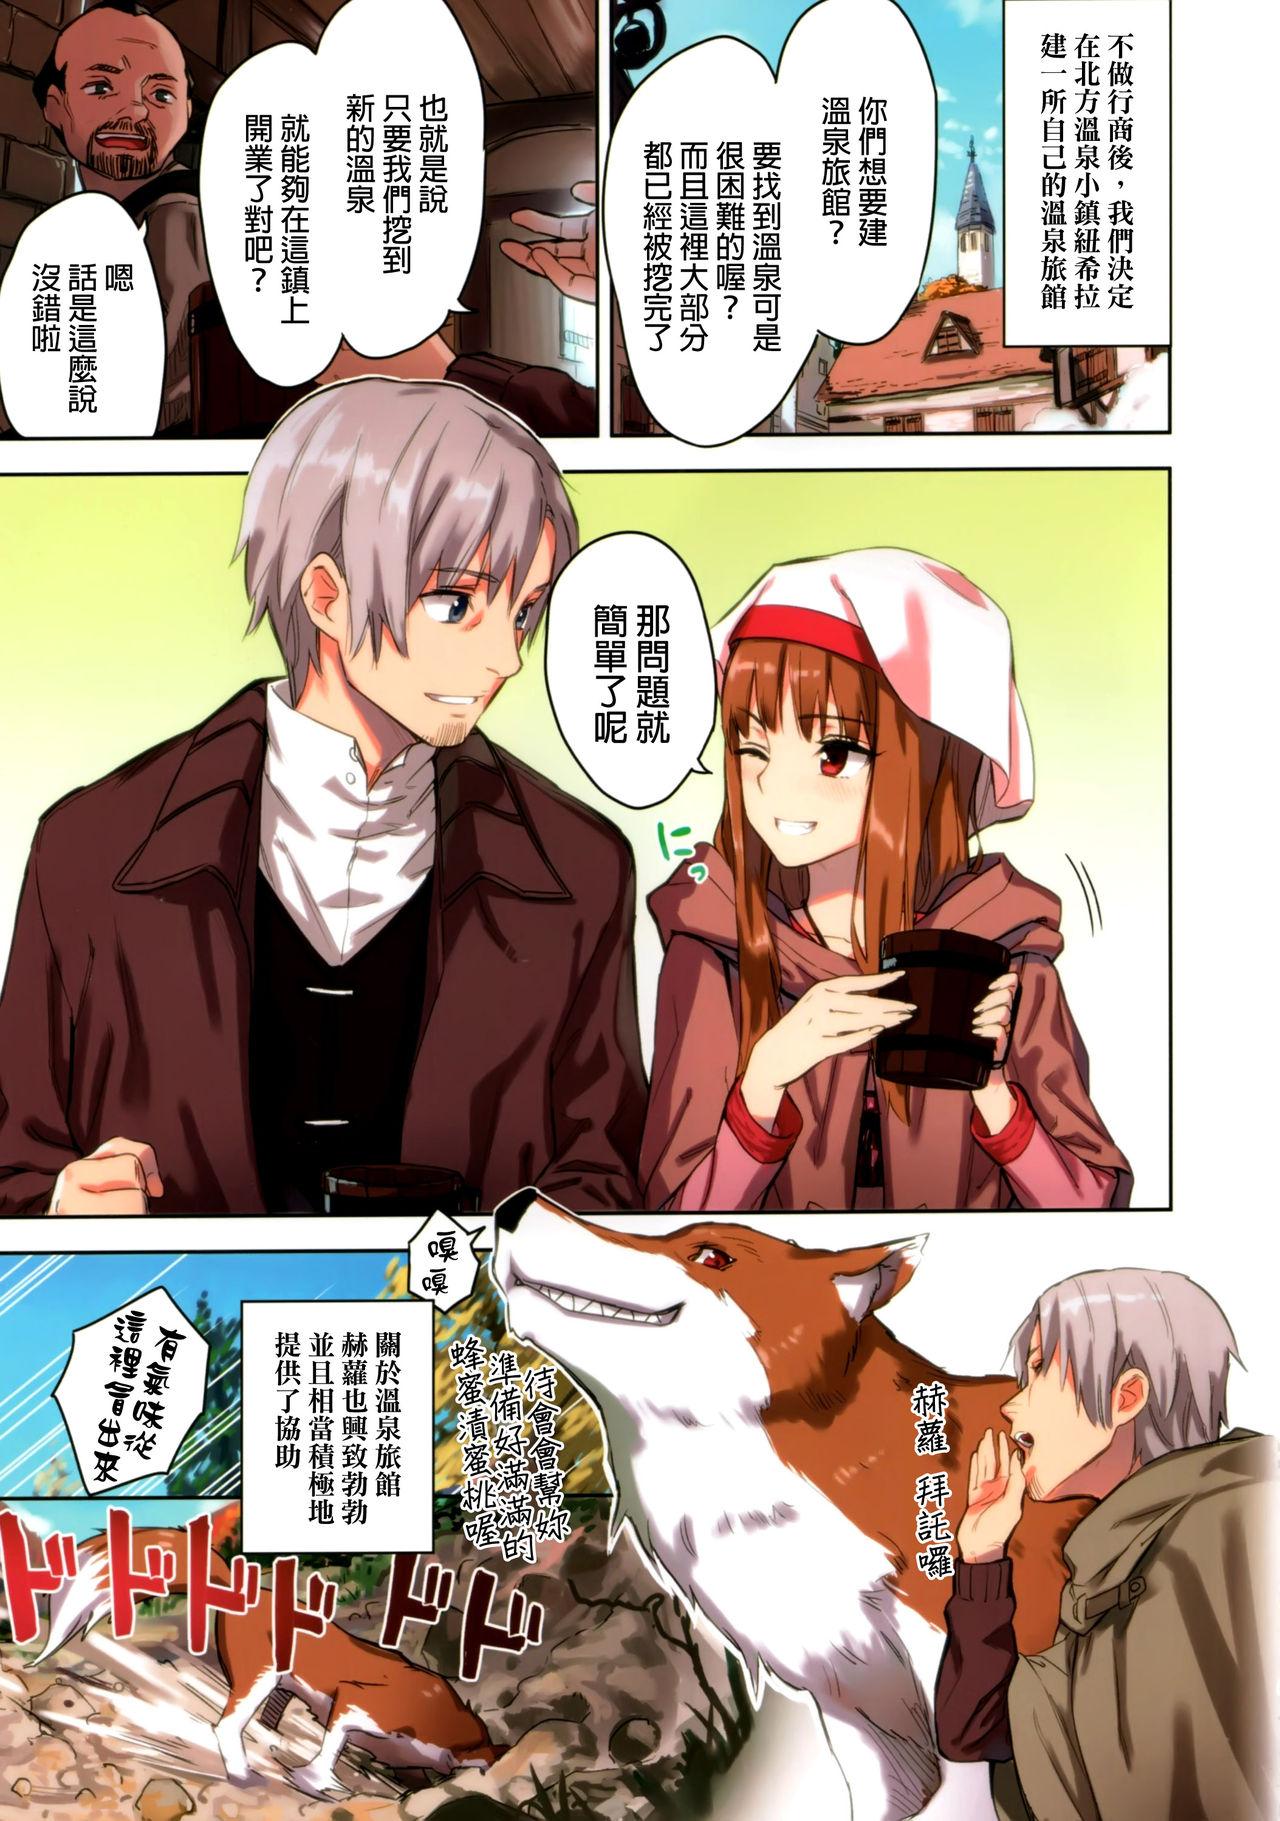 Gay Military Wacchi to Nyohhira Bon FULL COLOR - Spice and wolf Free Fucking - Page 6